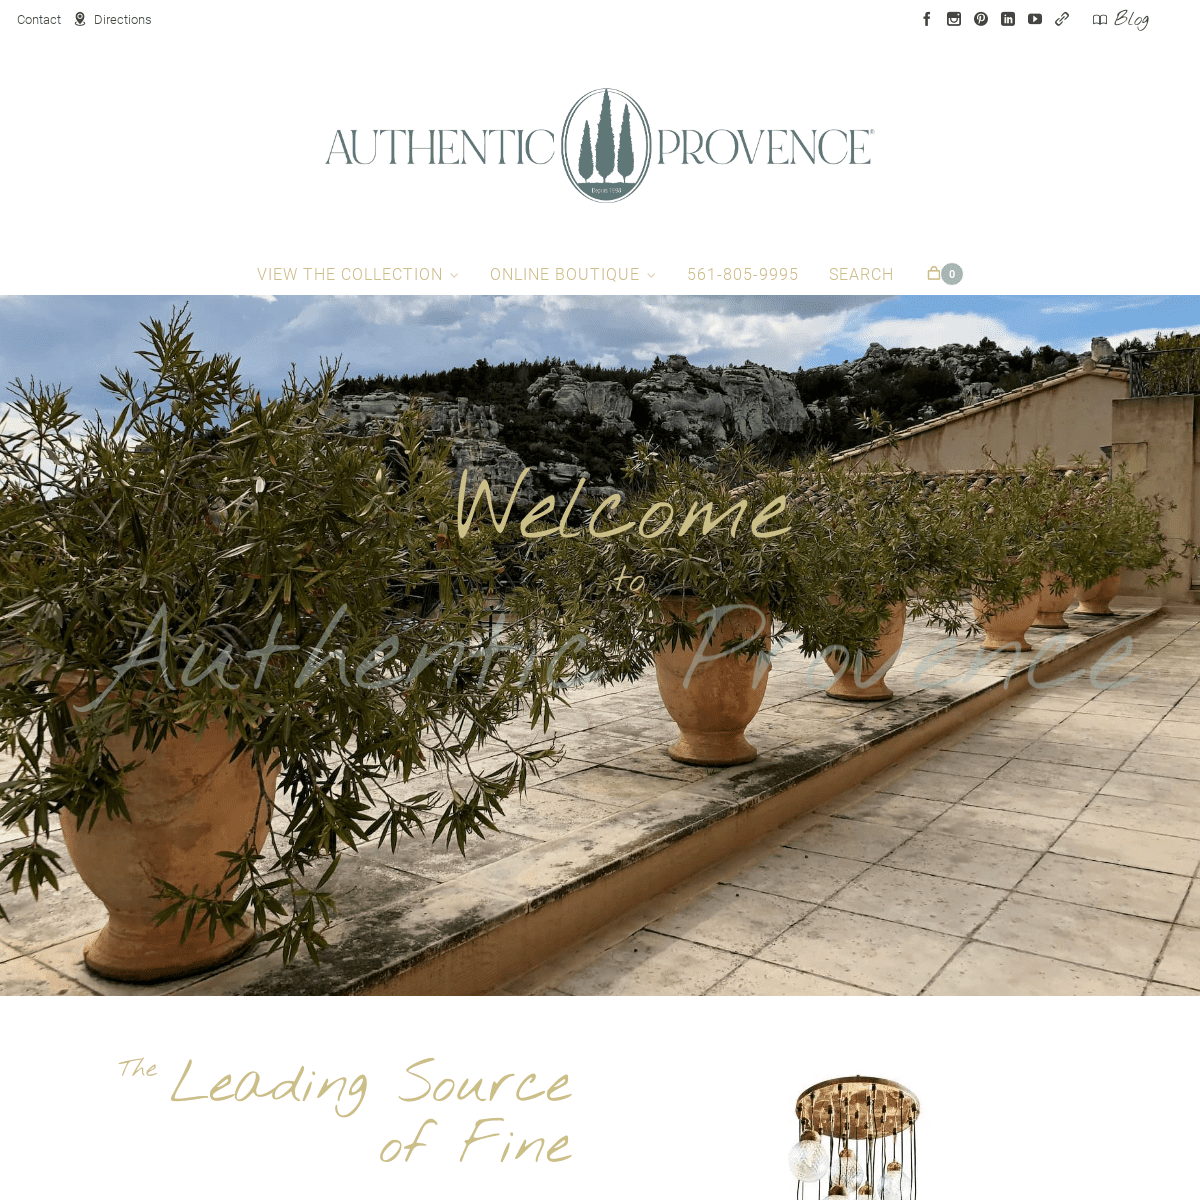 Finest Italian & French Antiques | Authentic Provence